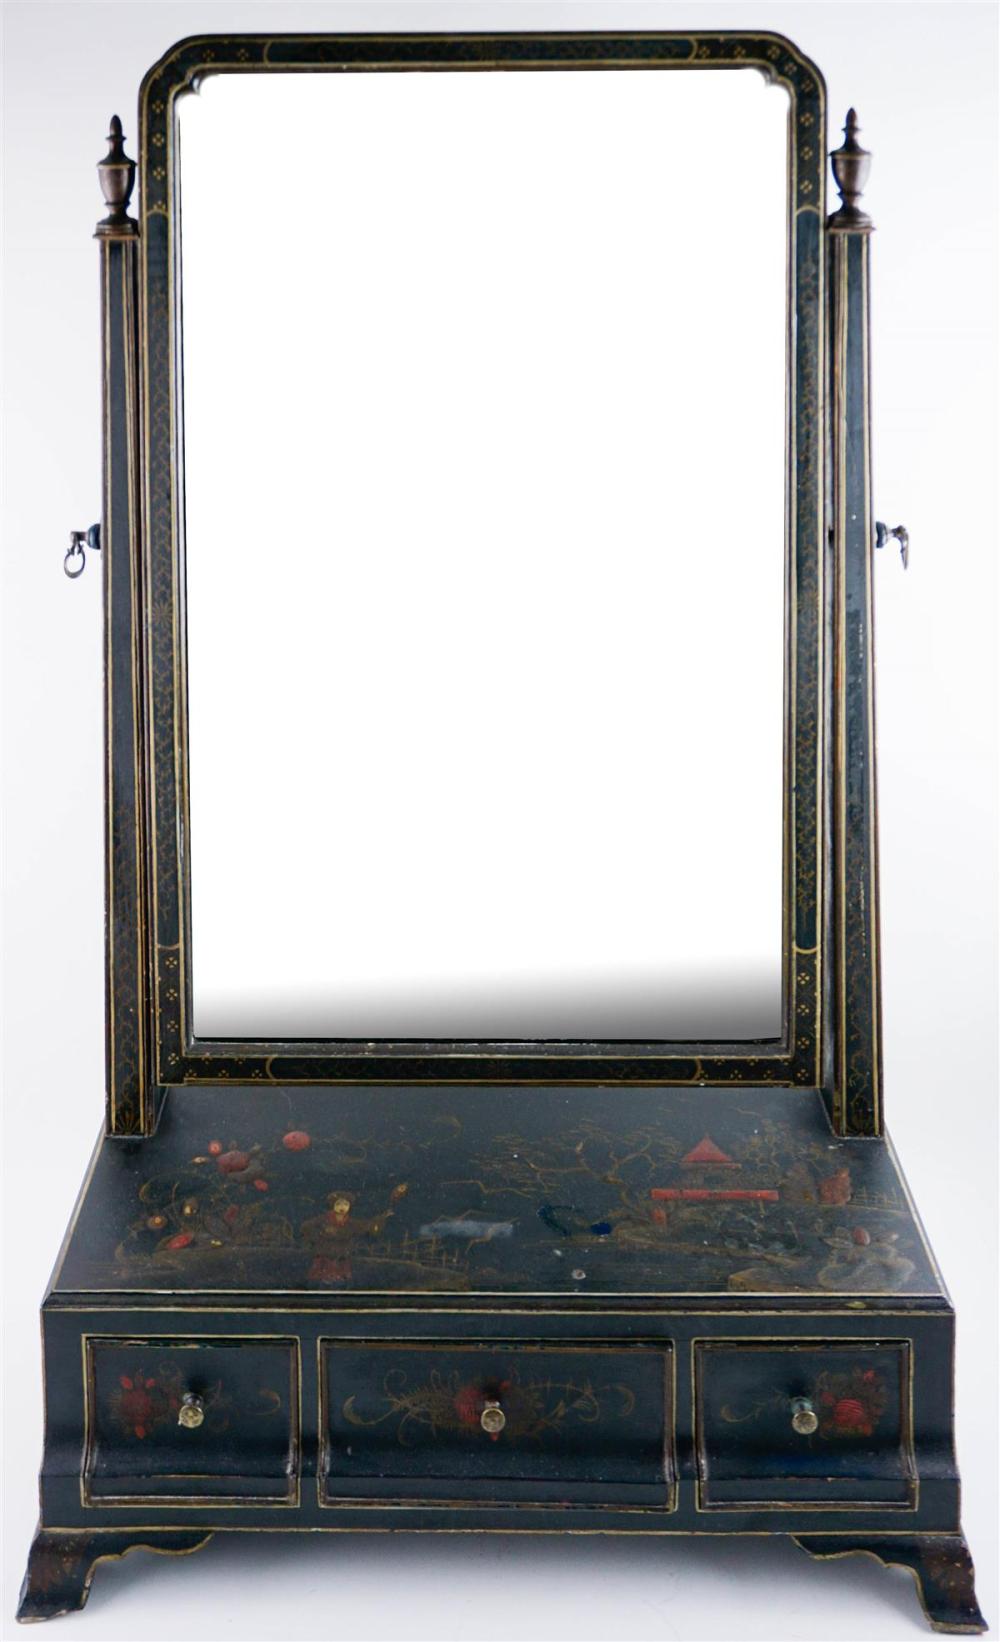 CHINOISERIE DRESSING TABLE MIRRORCHINOISERIE 312441